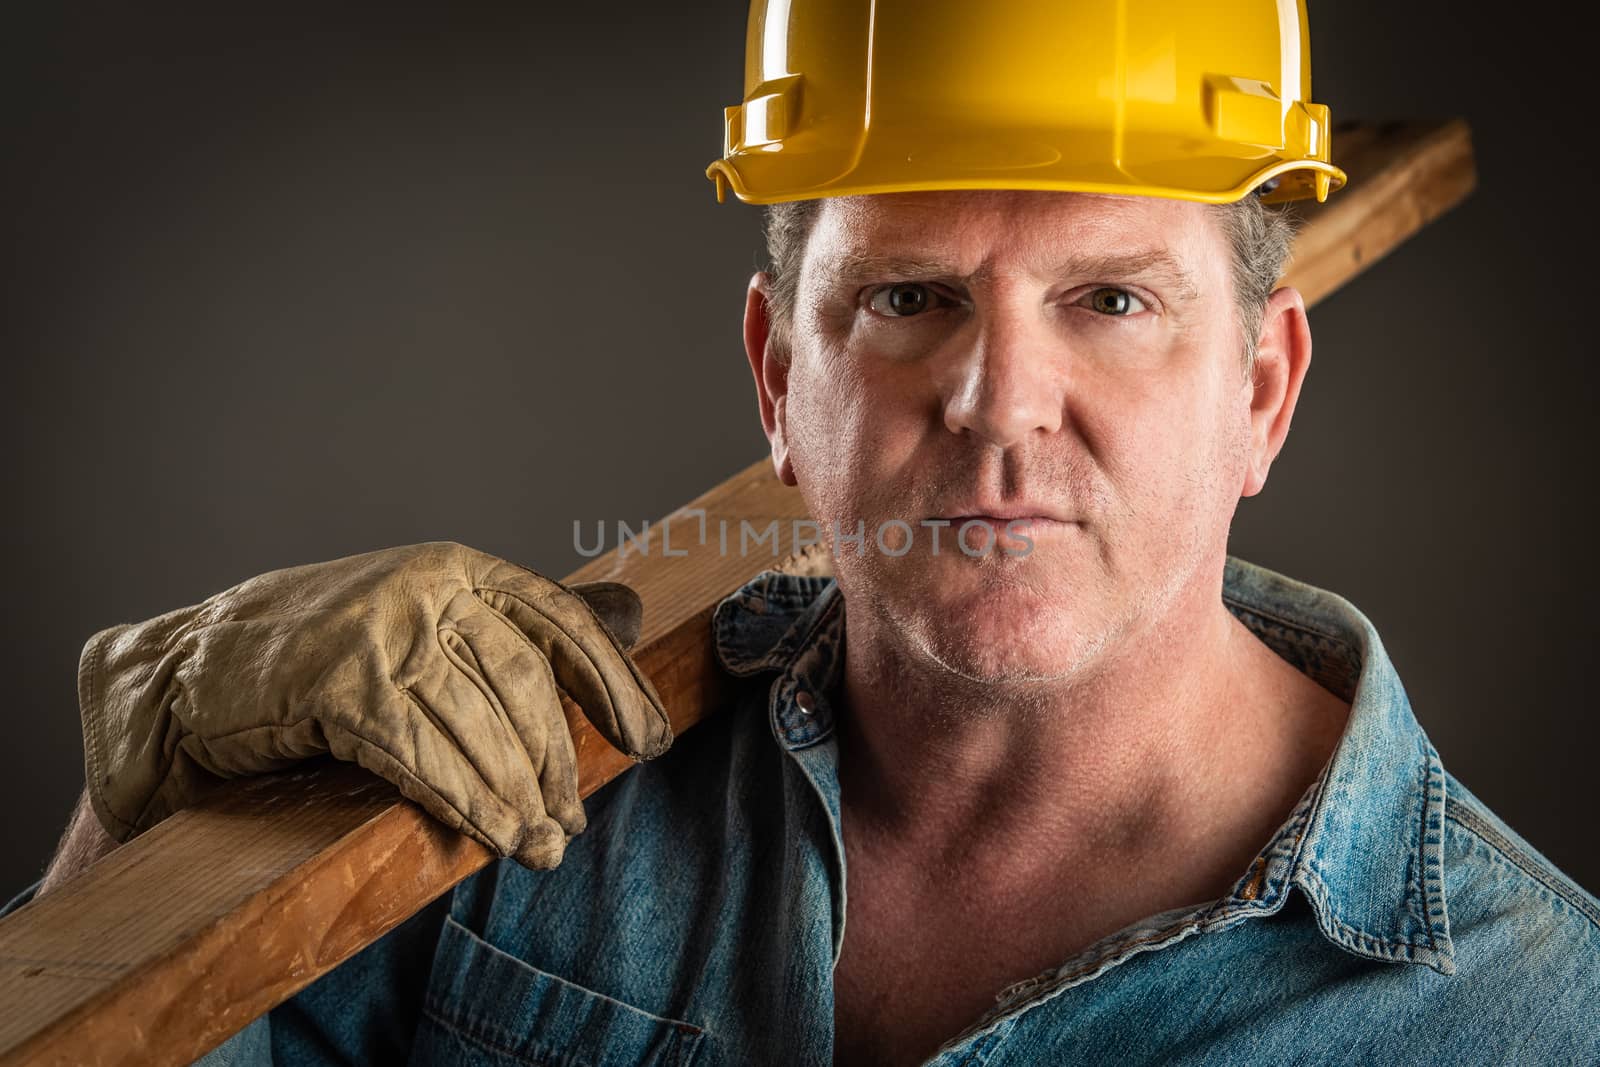 Serious Contractor in Hard Hat Holding Plank of Wood With Dramatic Lighting. by Feverpitched